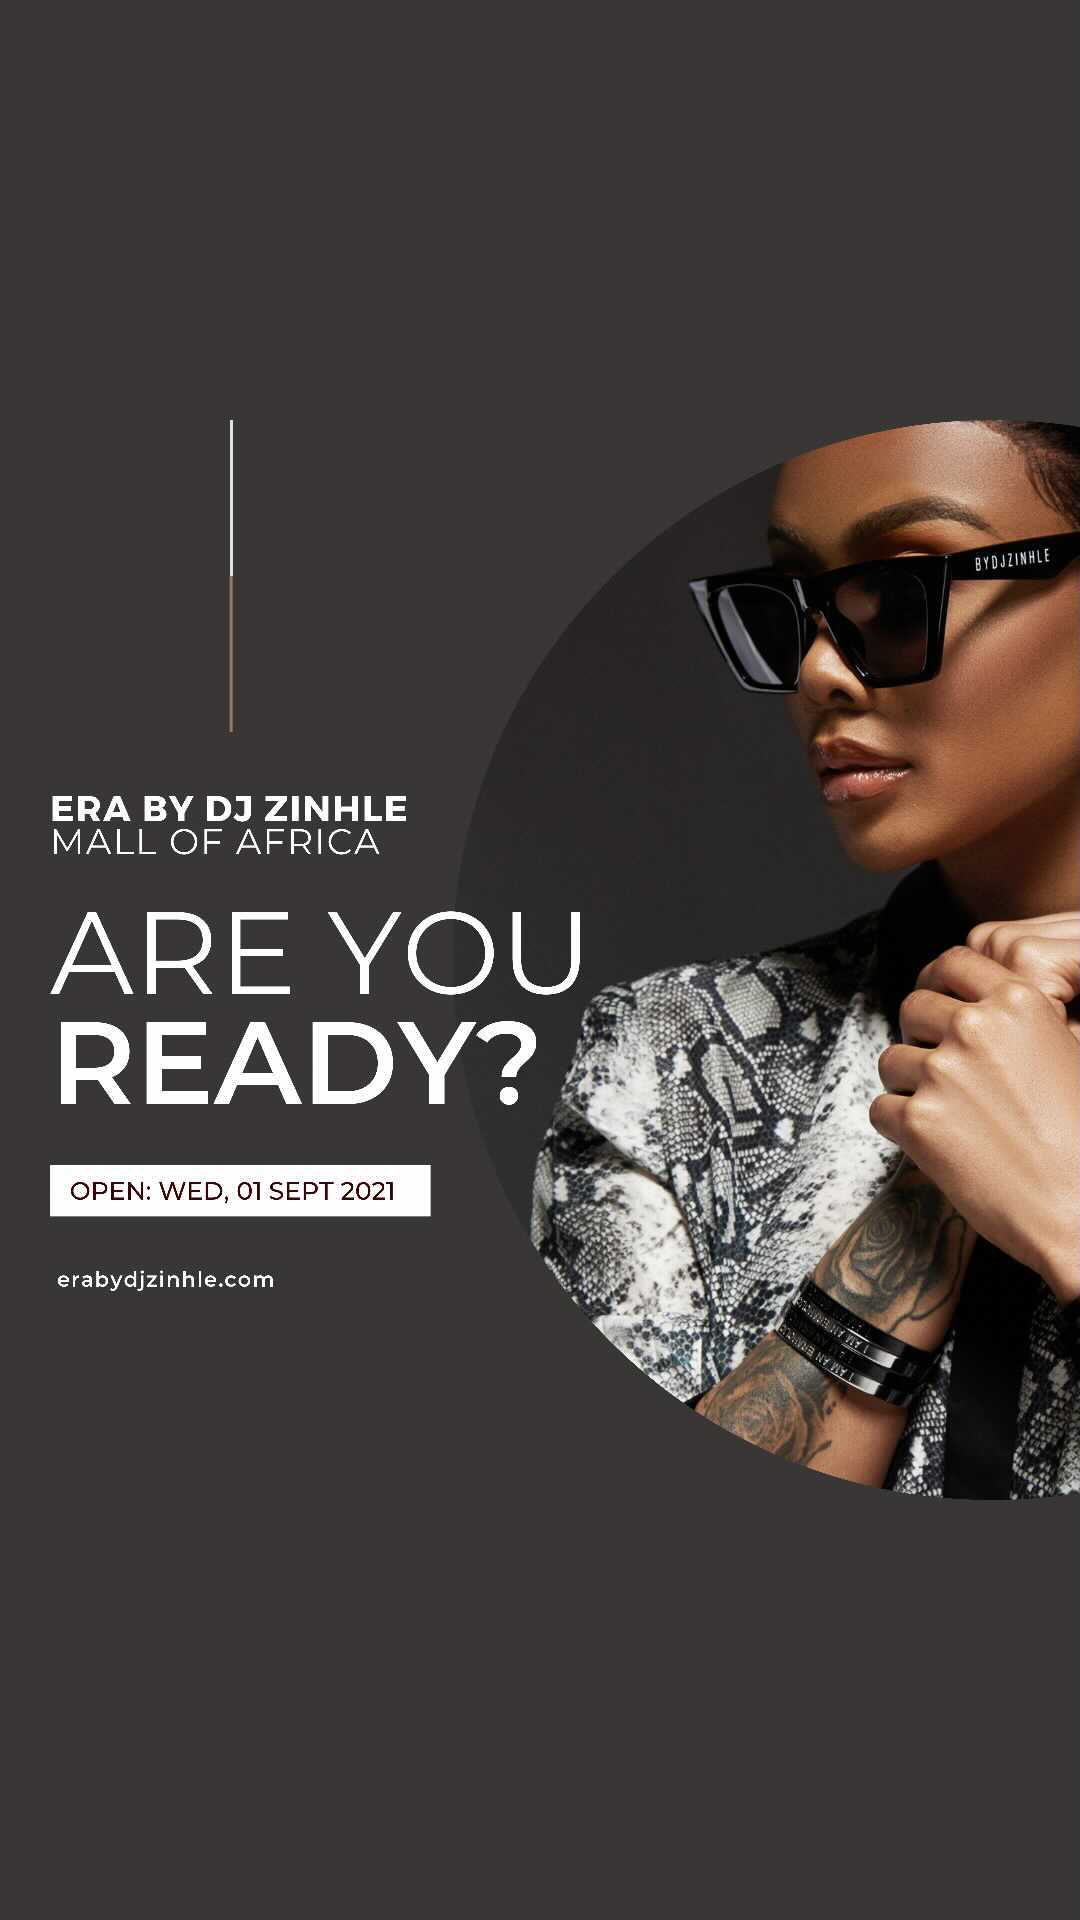 DJ Zinhle’s Big Day Is Finally Here